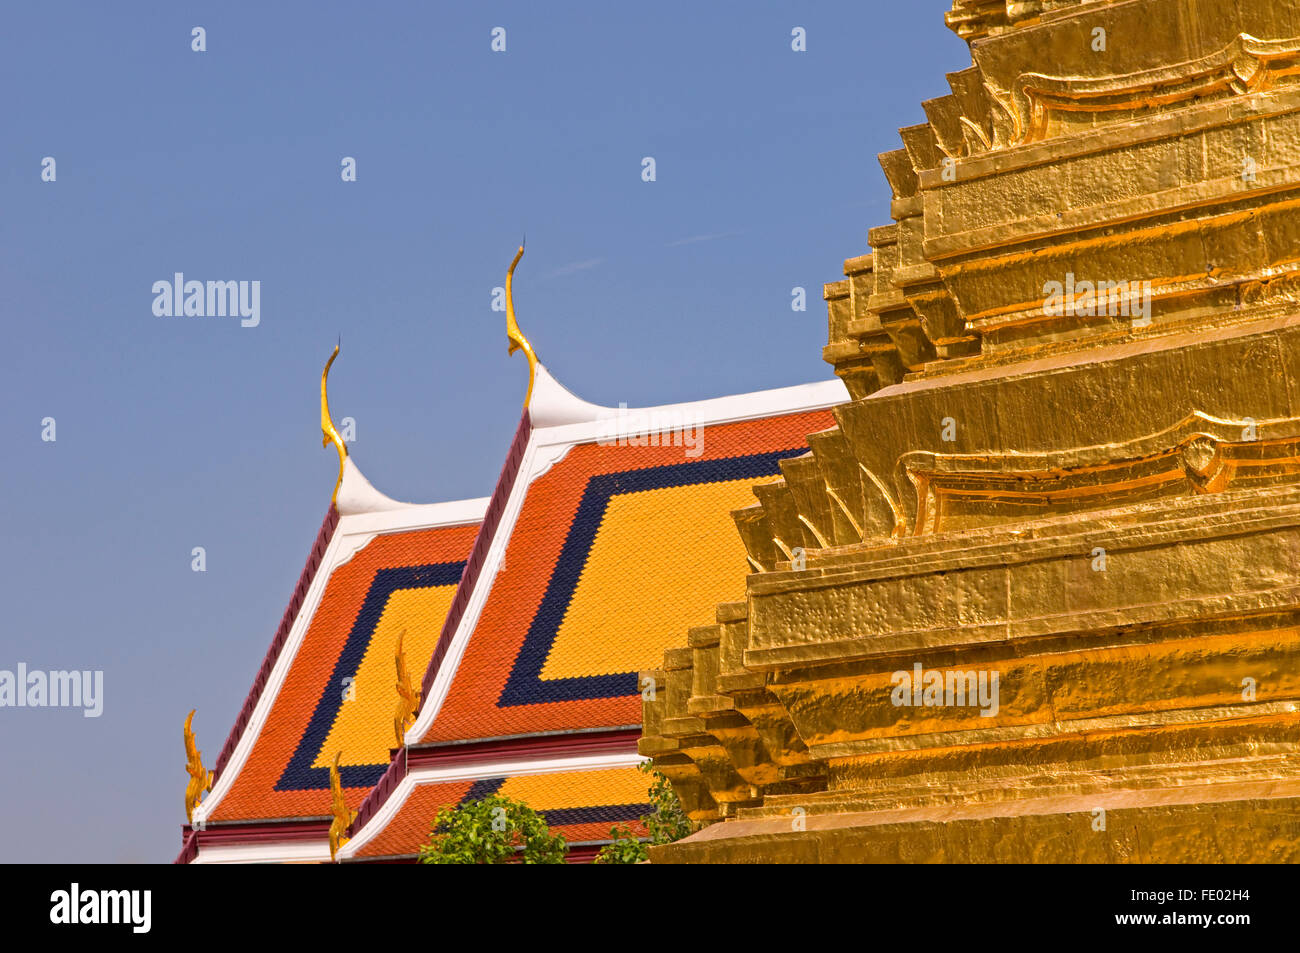 Colourful roof top of the Grand Palace, Bangkok, Thailand Stock Photo